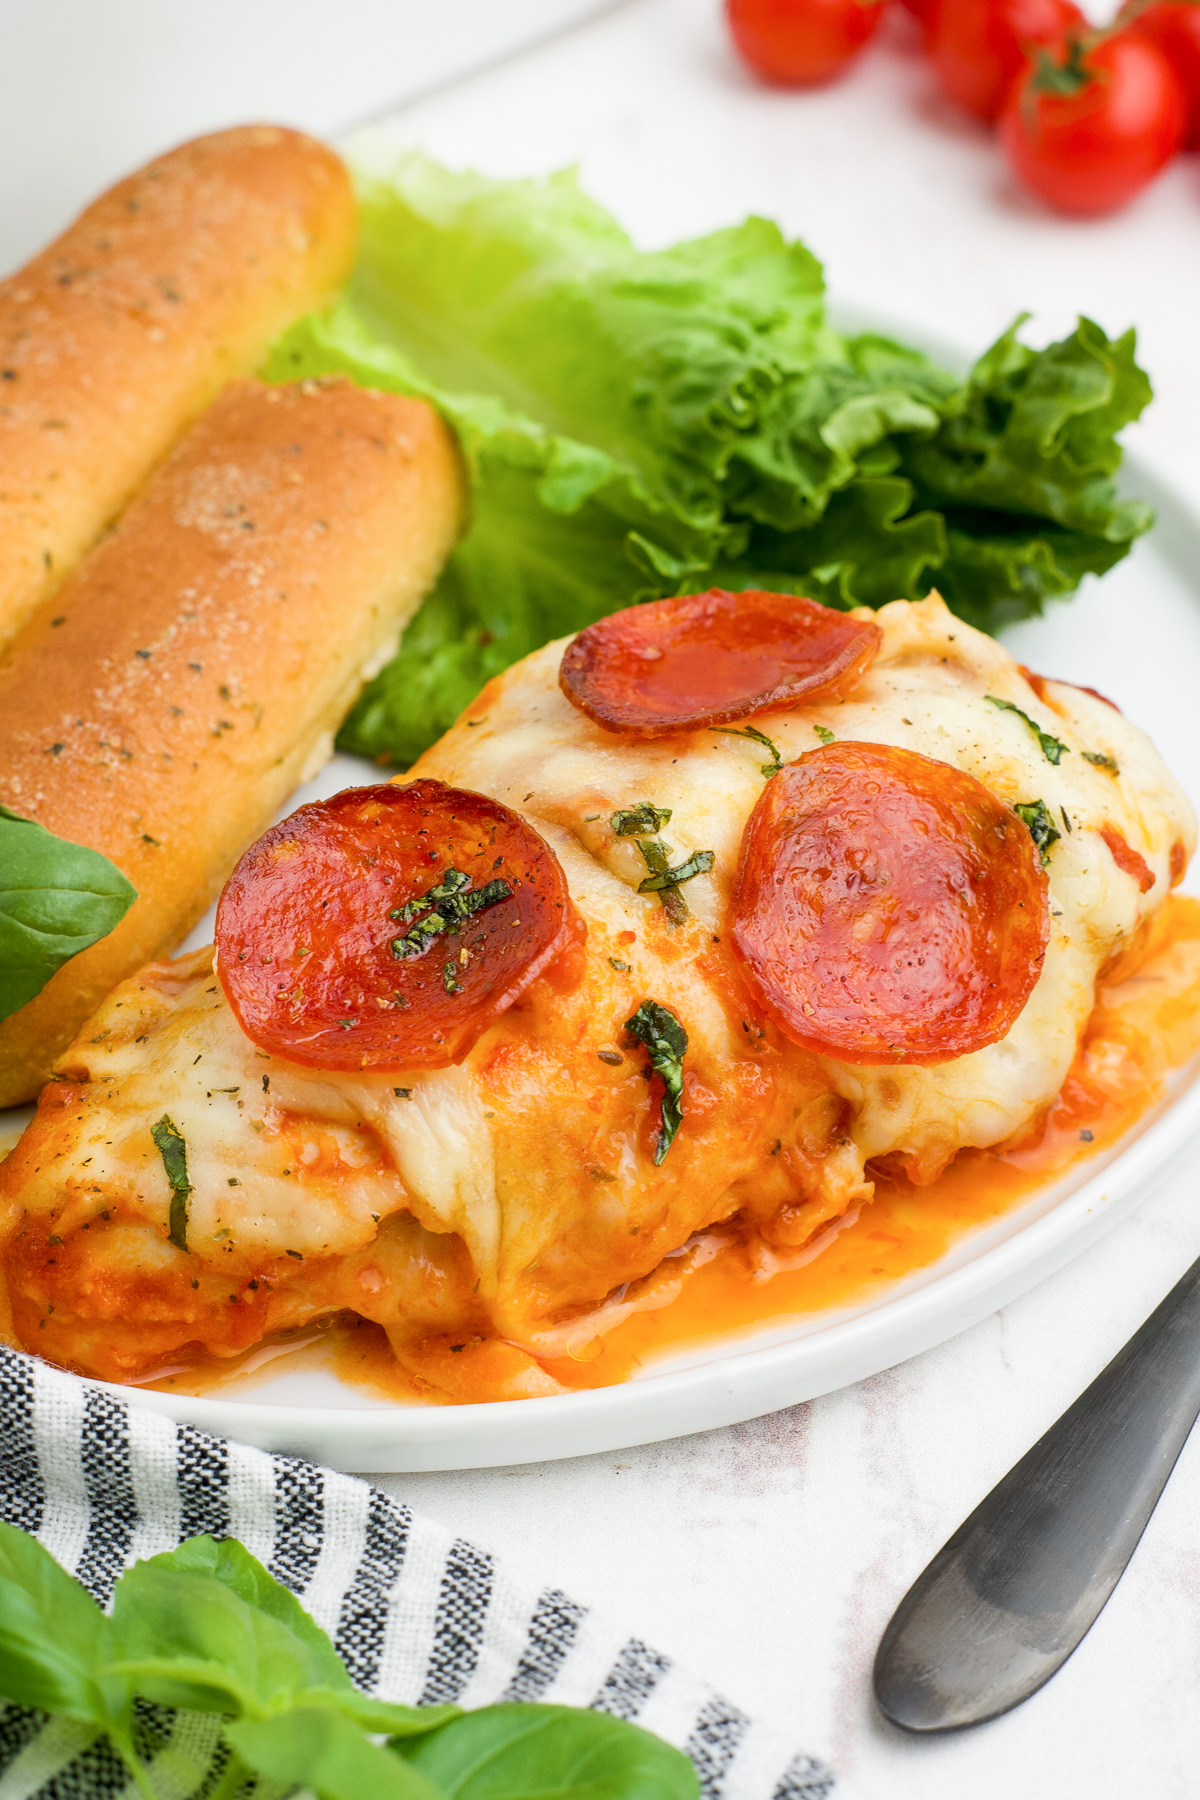 Stuffed pizza chicken breast on a plate covered in cheese and pepperoni next to breadsticks and salad from the side.